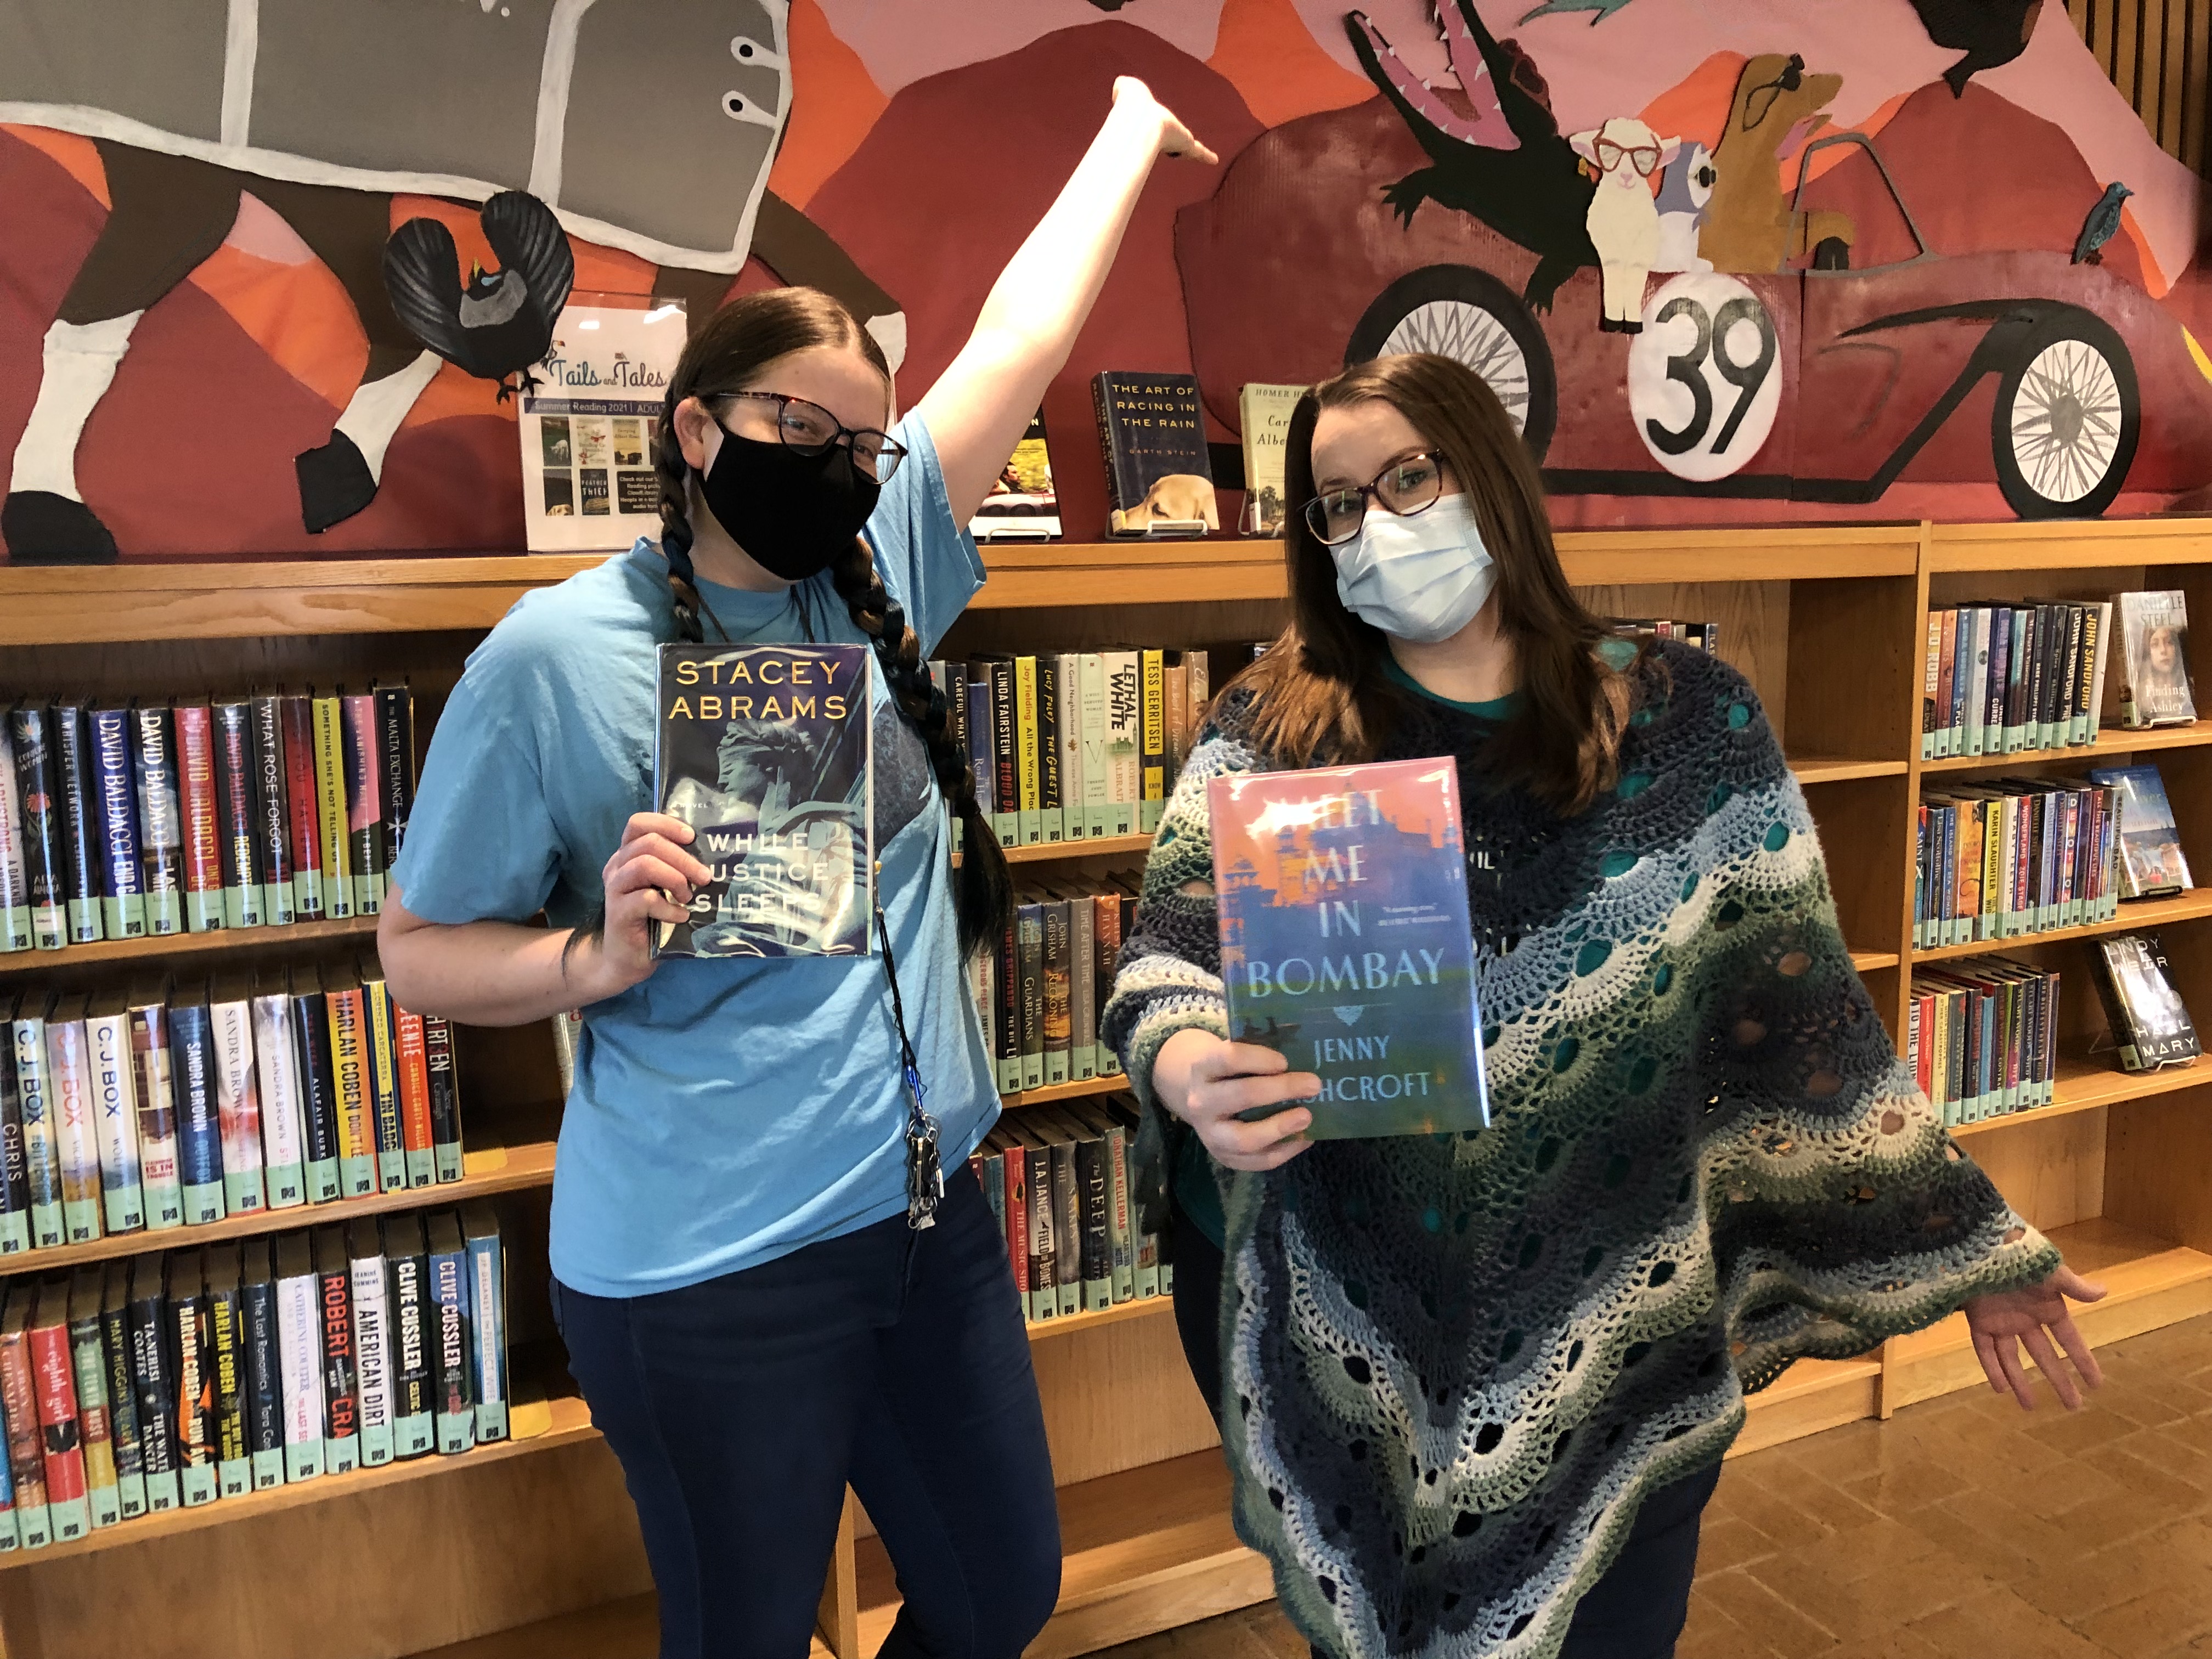 Two women wearing masks and holding books stand in front of a book shelf.